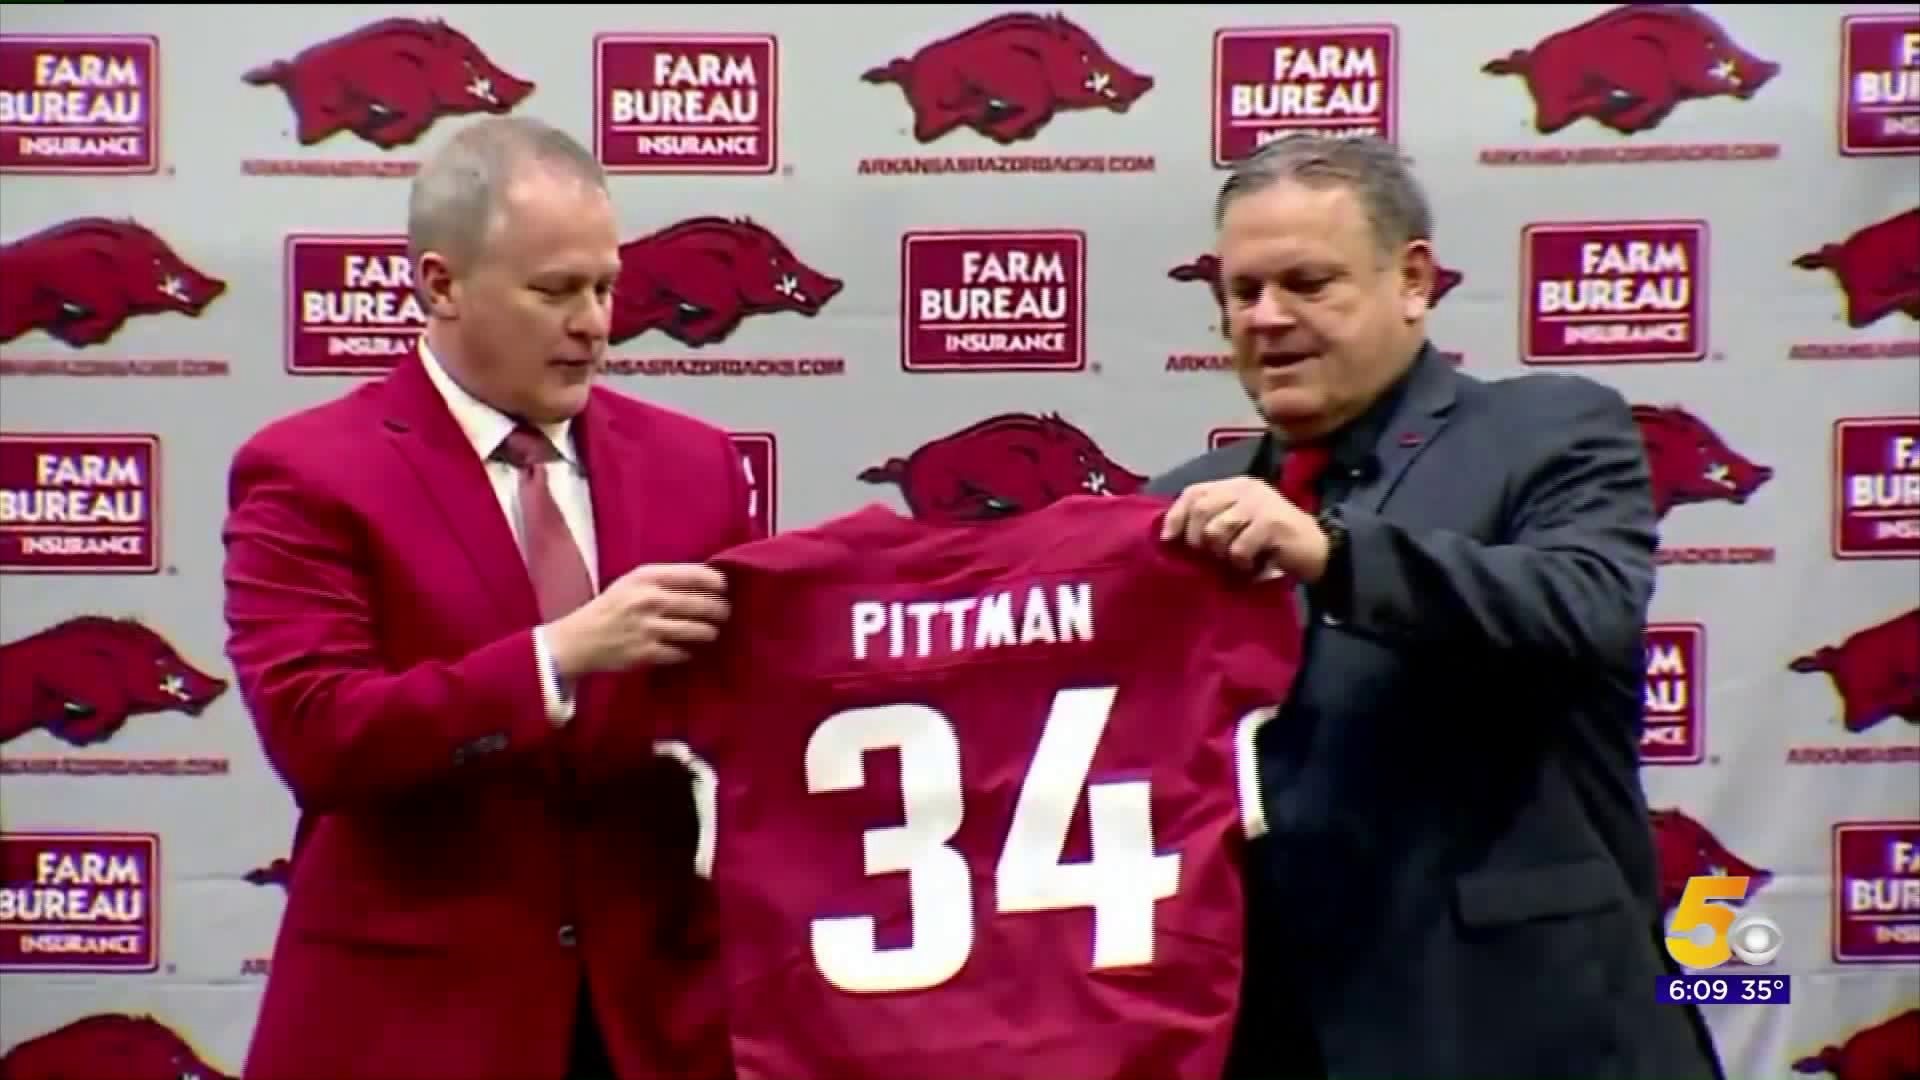 Big Crowd Welcomes Pittman In Introductory Press Conference